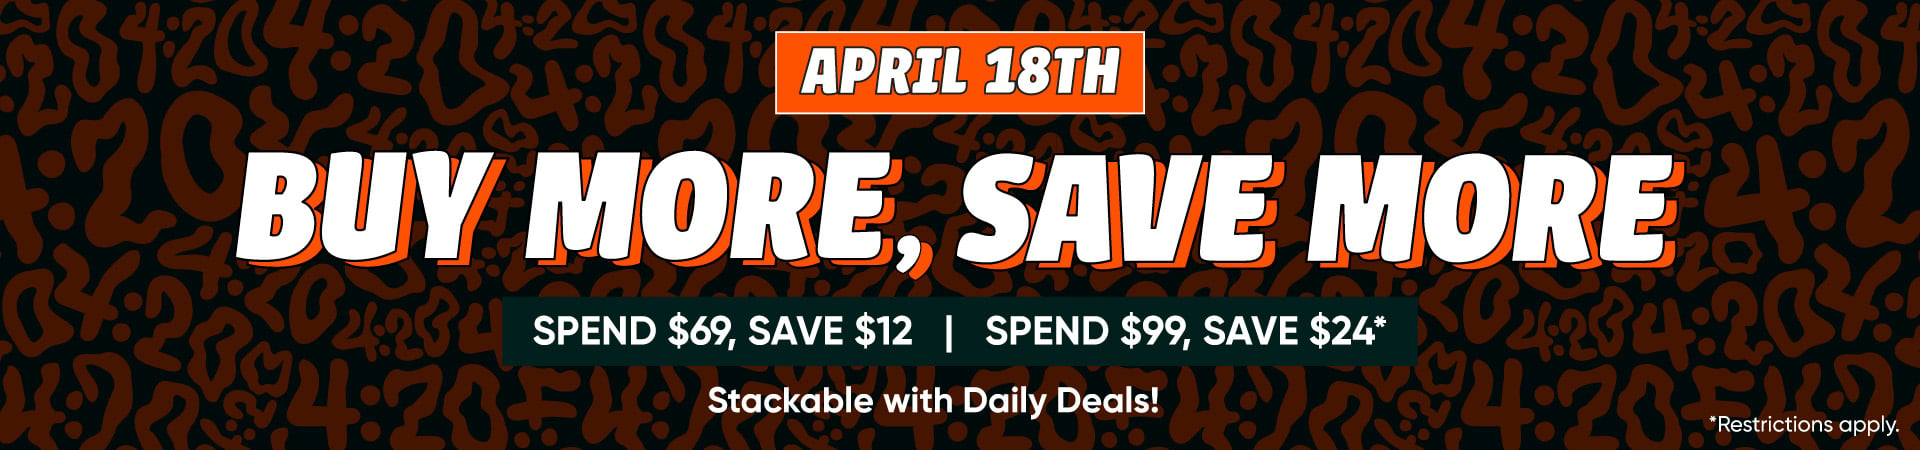 Buy more, save more. Spend $69, save $12 | spend $99, save $24